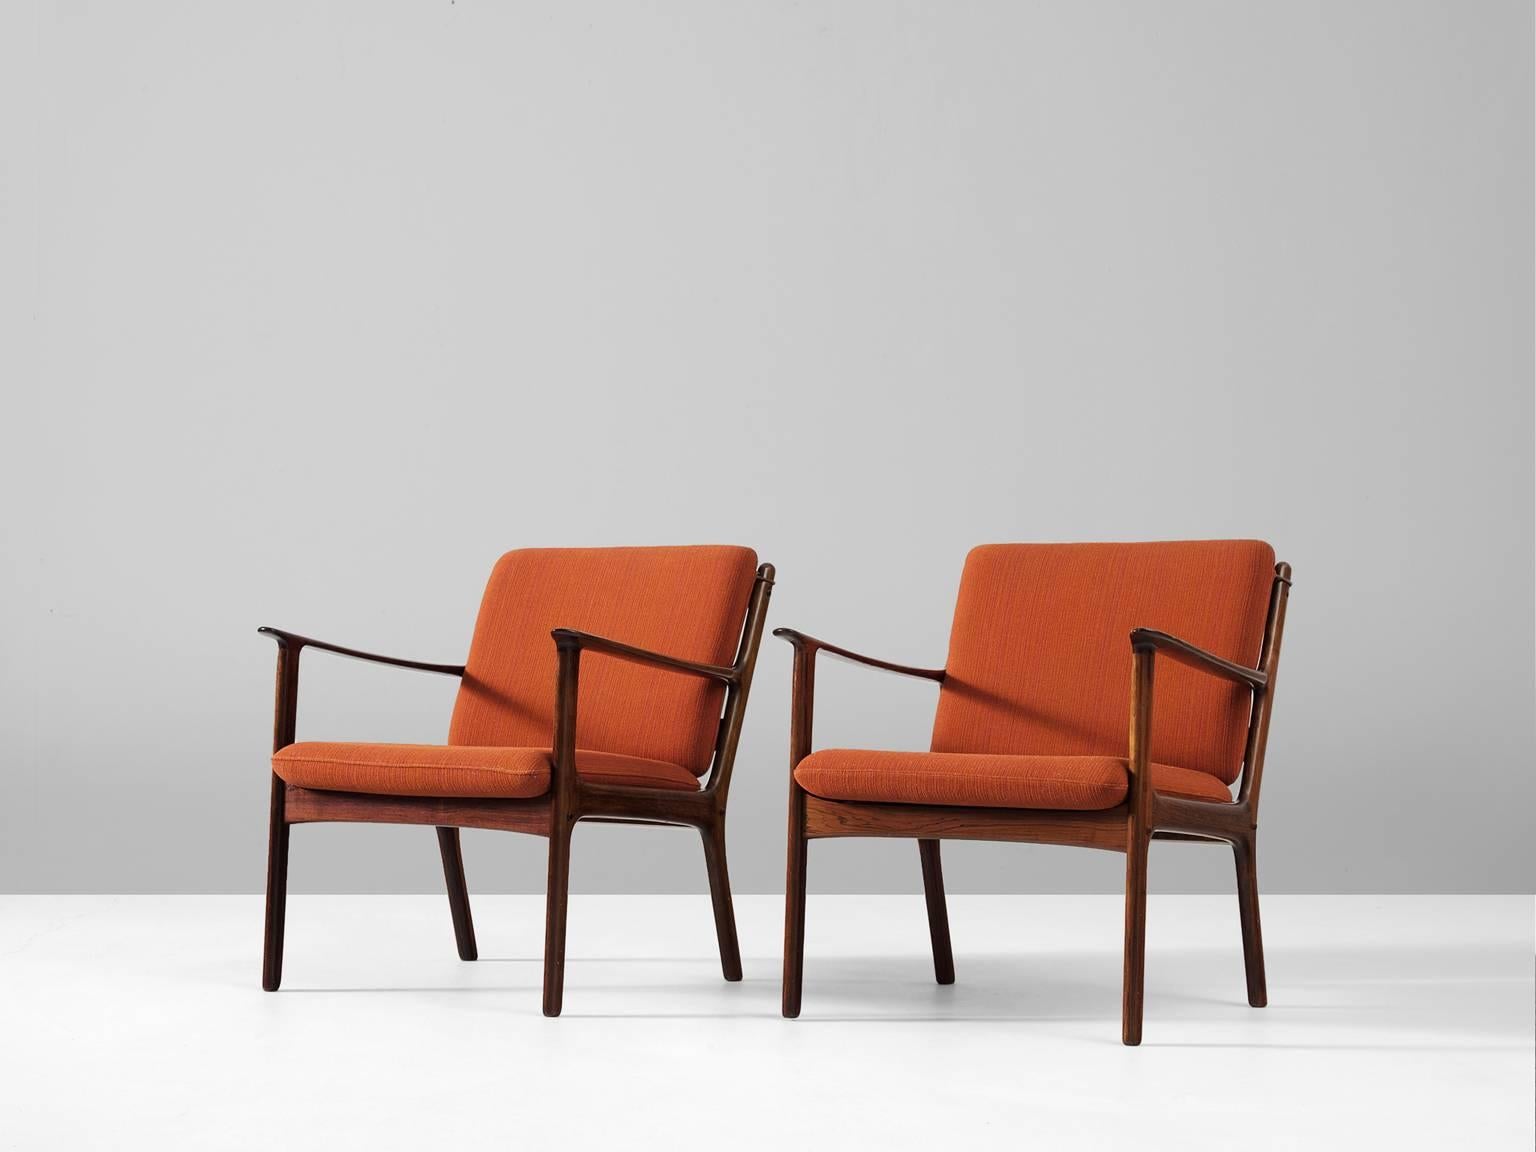 Pair of armchairs, in rosewood and fabric, by Ole Wanscher for P. Jeppesen Møbelfabrik, Denmark, 1951. 

Lounge chair model PJ 112 has an elegant solid rosewood frame, with nicely designed armrests and back. Due the slightly curves of the frame